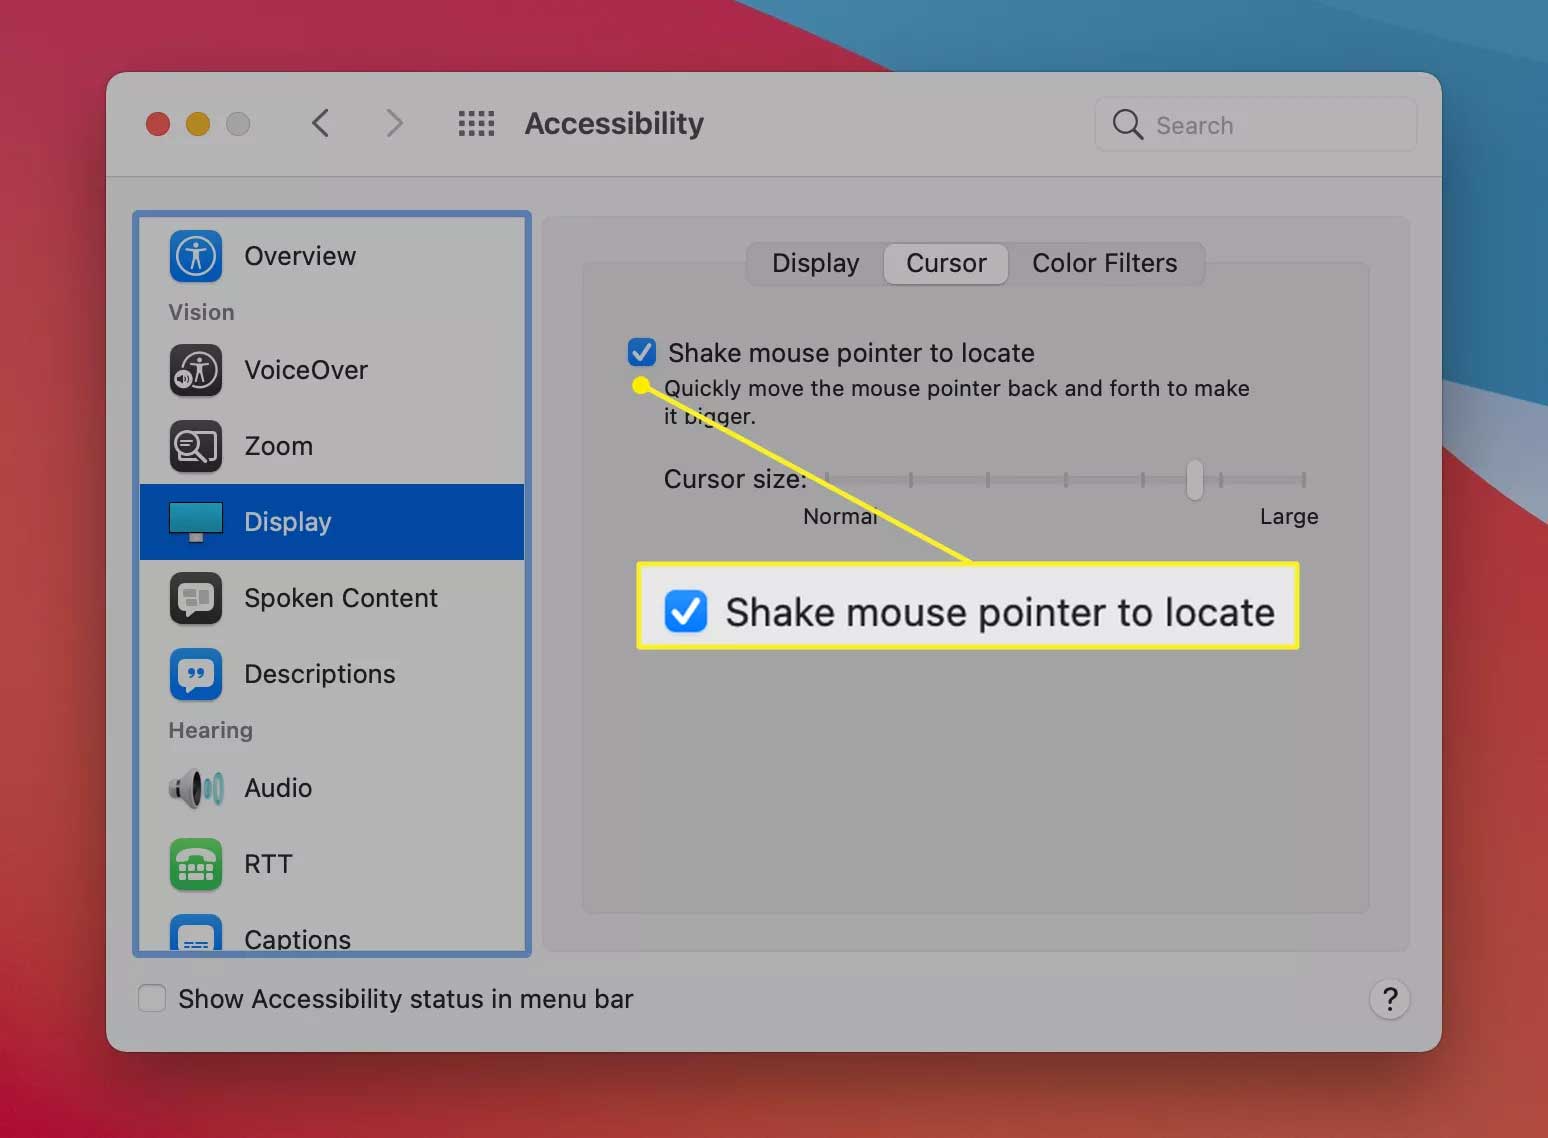 Shake mouse pointer to locate